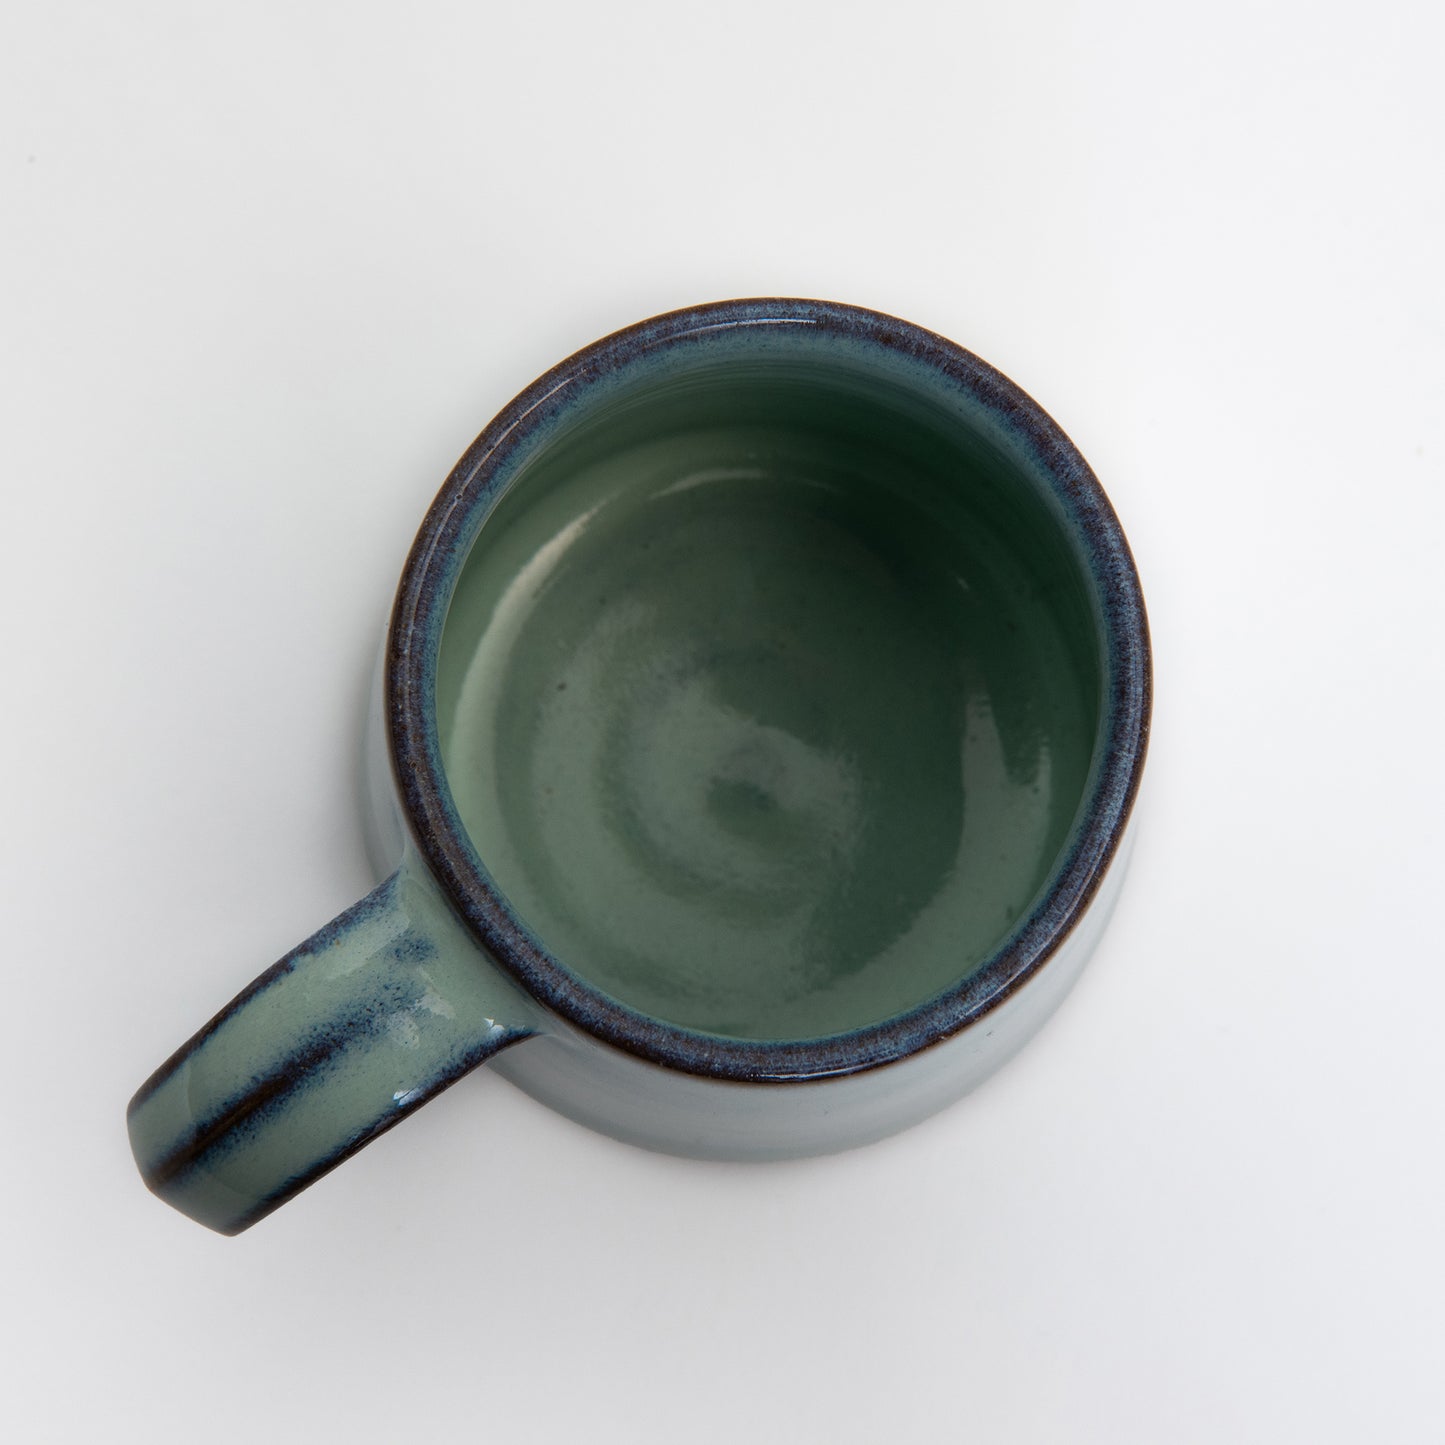 Shot of the mug from above showing detail on the handle